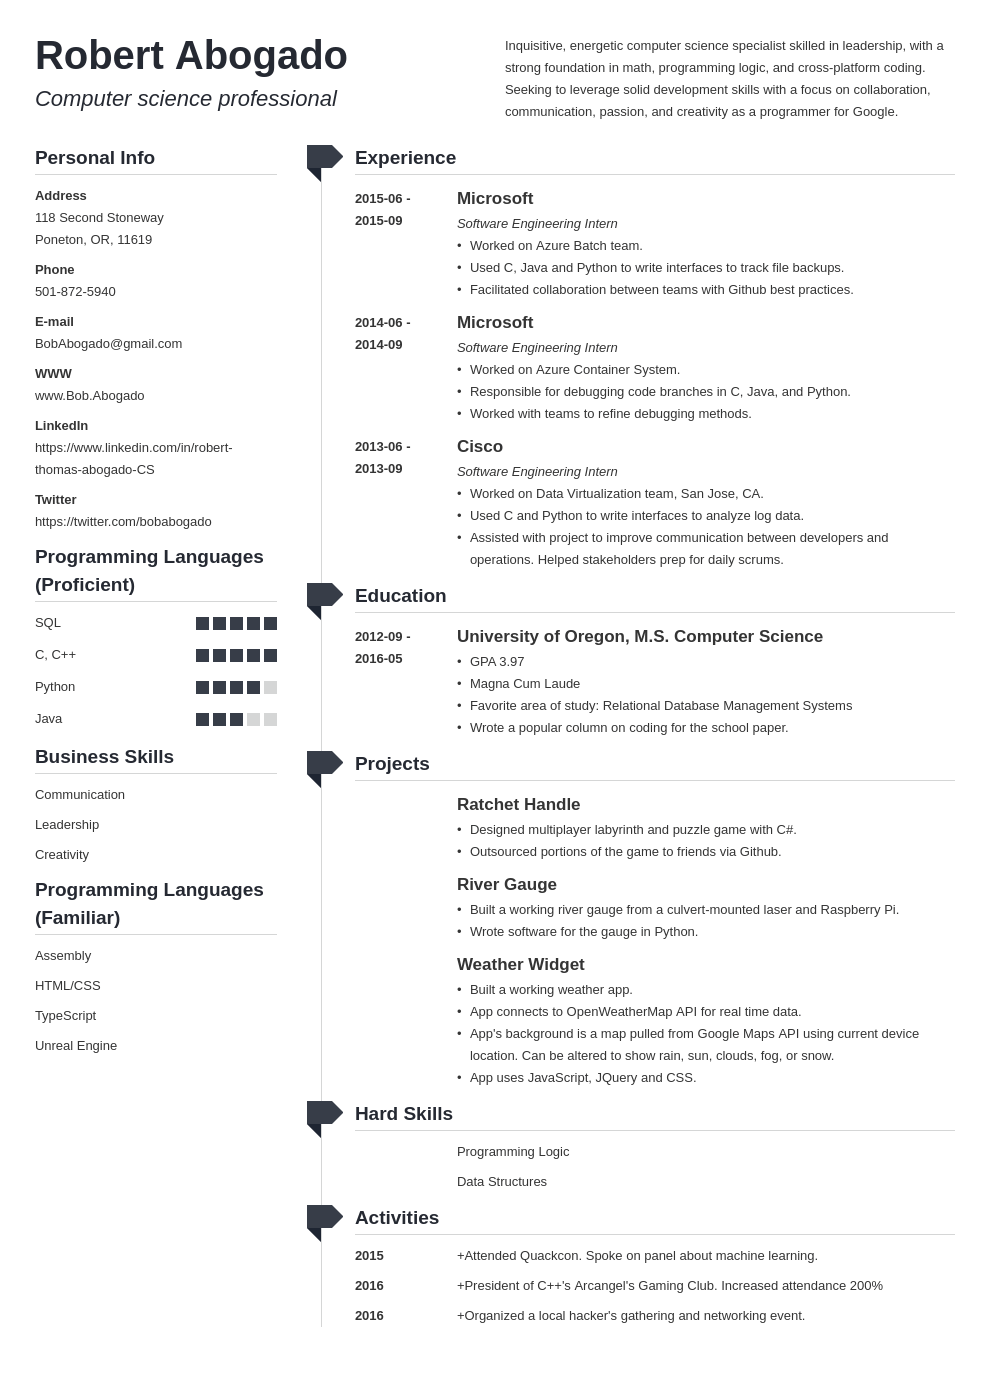 Computer Science Cv Example from cdn-images.zety.com